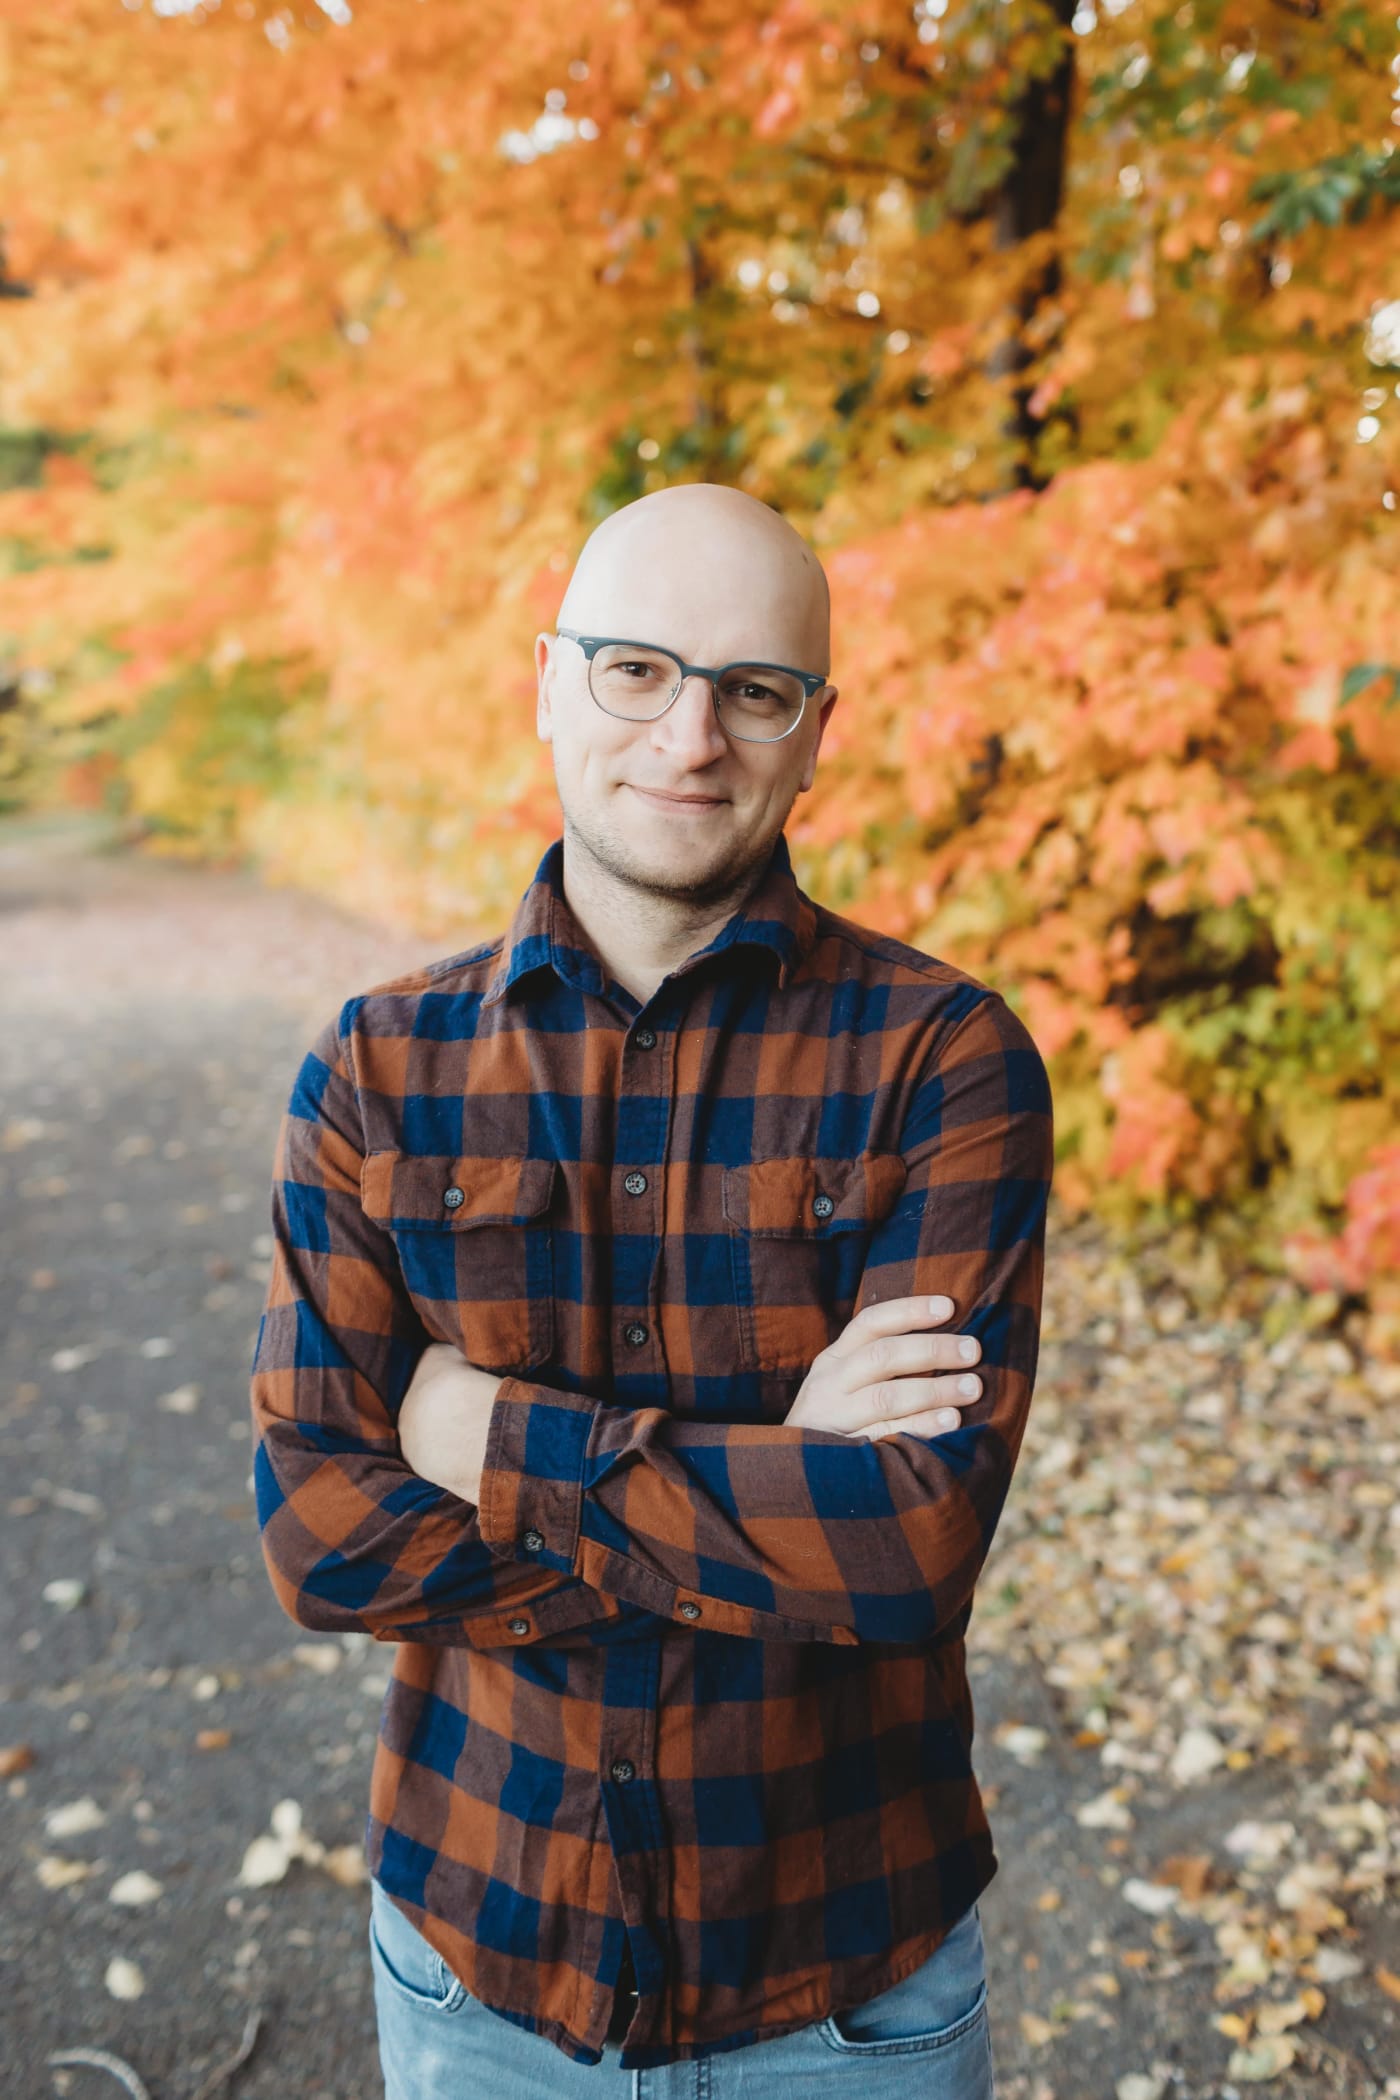 A portrait of Brian Muenzenmeyer. Brian is a 30-somthing bald white man wearing a plaid shirt, grey glasses, and a five o'lock shadow. Photo taken by Samantha Brinda Photography.